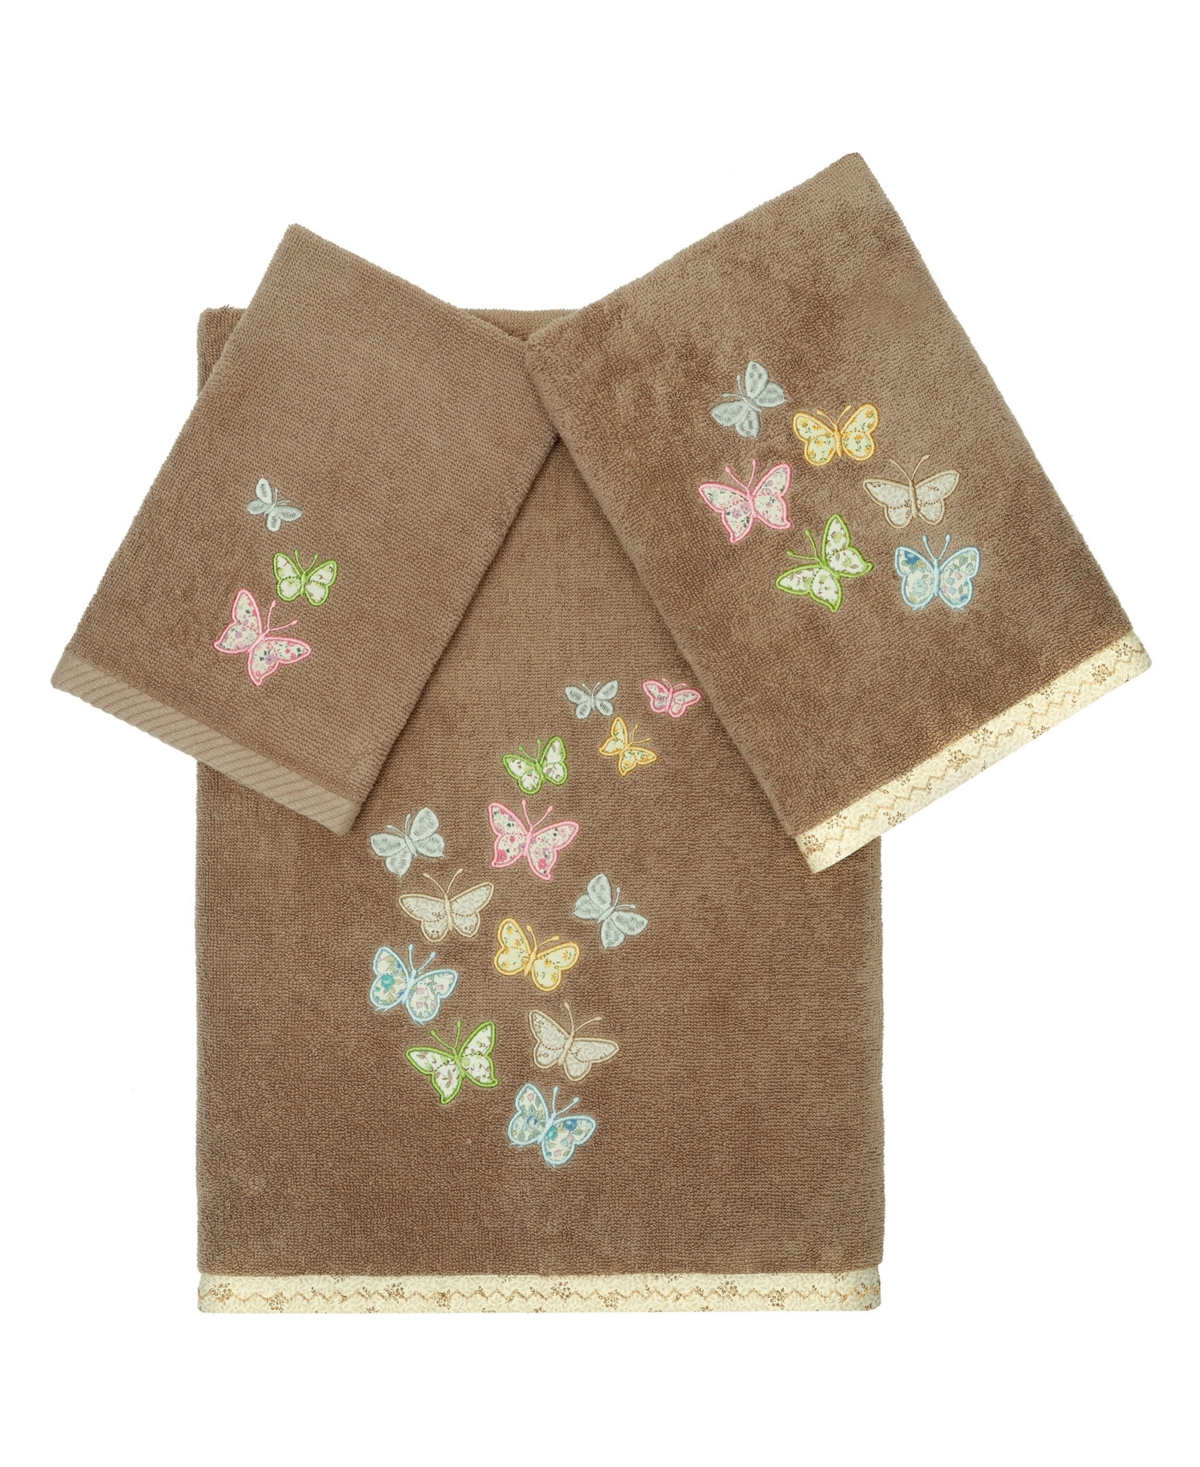 Linum Home Textiles Turkish Cotton Mariposa Embellished Towel Set, 3 Piece In Cocoa